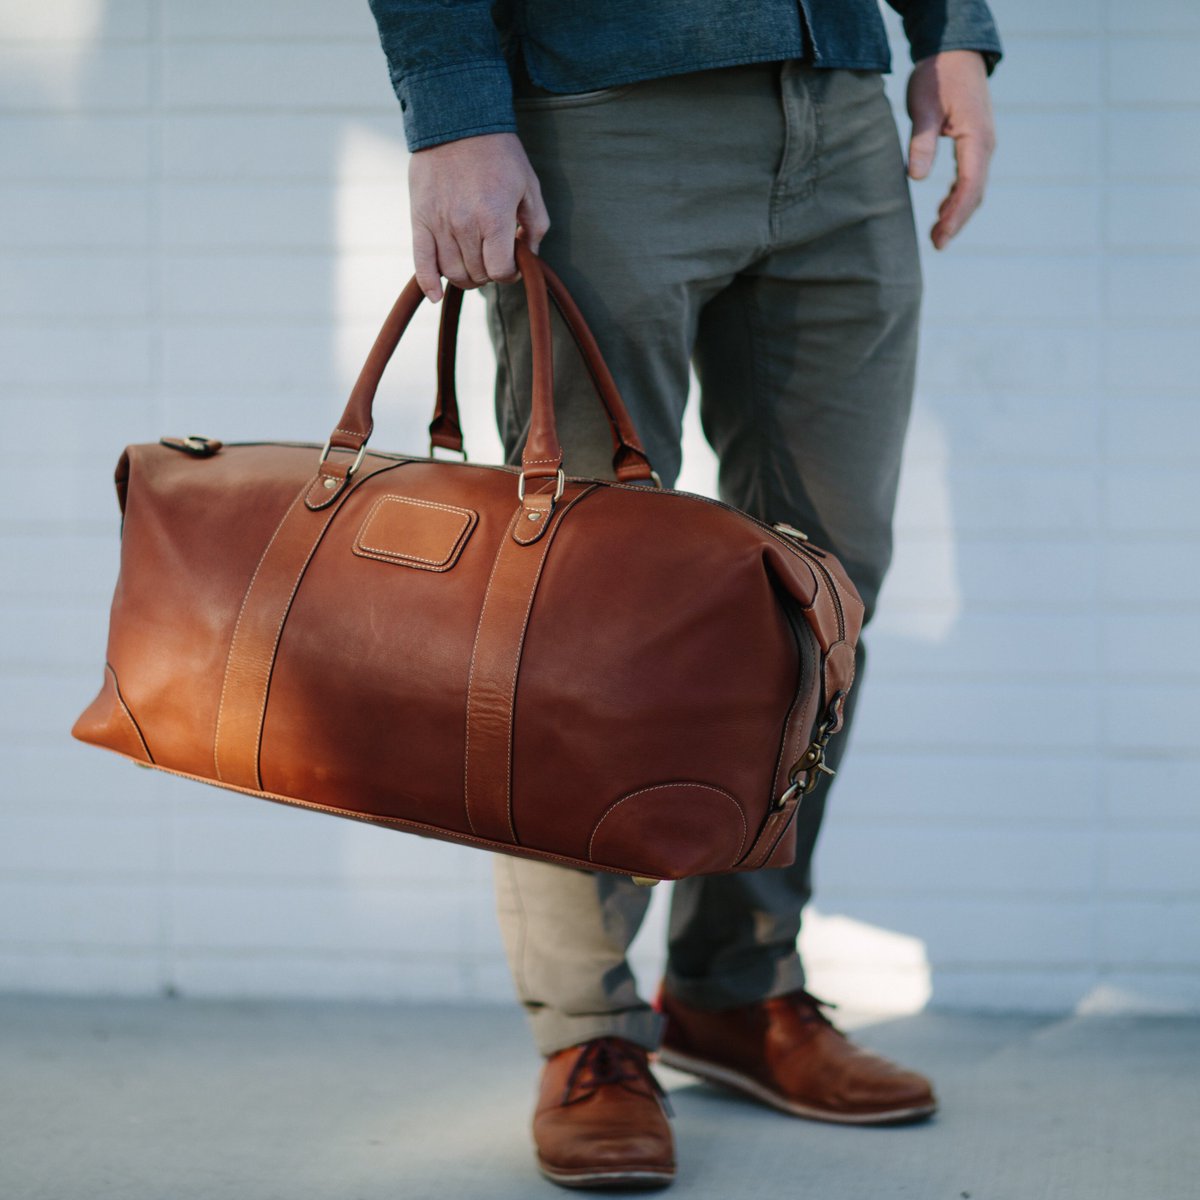 Stand out and travel in style with the Weekender Bag. 
.
.
.
.
.
.
.
.
.
#ethicalfashion #weekender #leatherweekender #uganda #workingfortheweekend #leatherbags #fashionwithapurpose #fashion #ventureleather